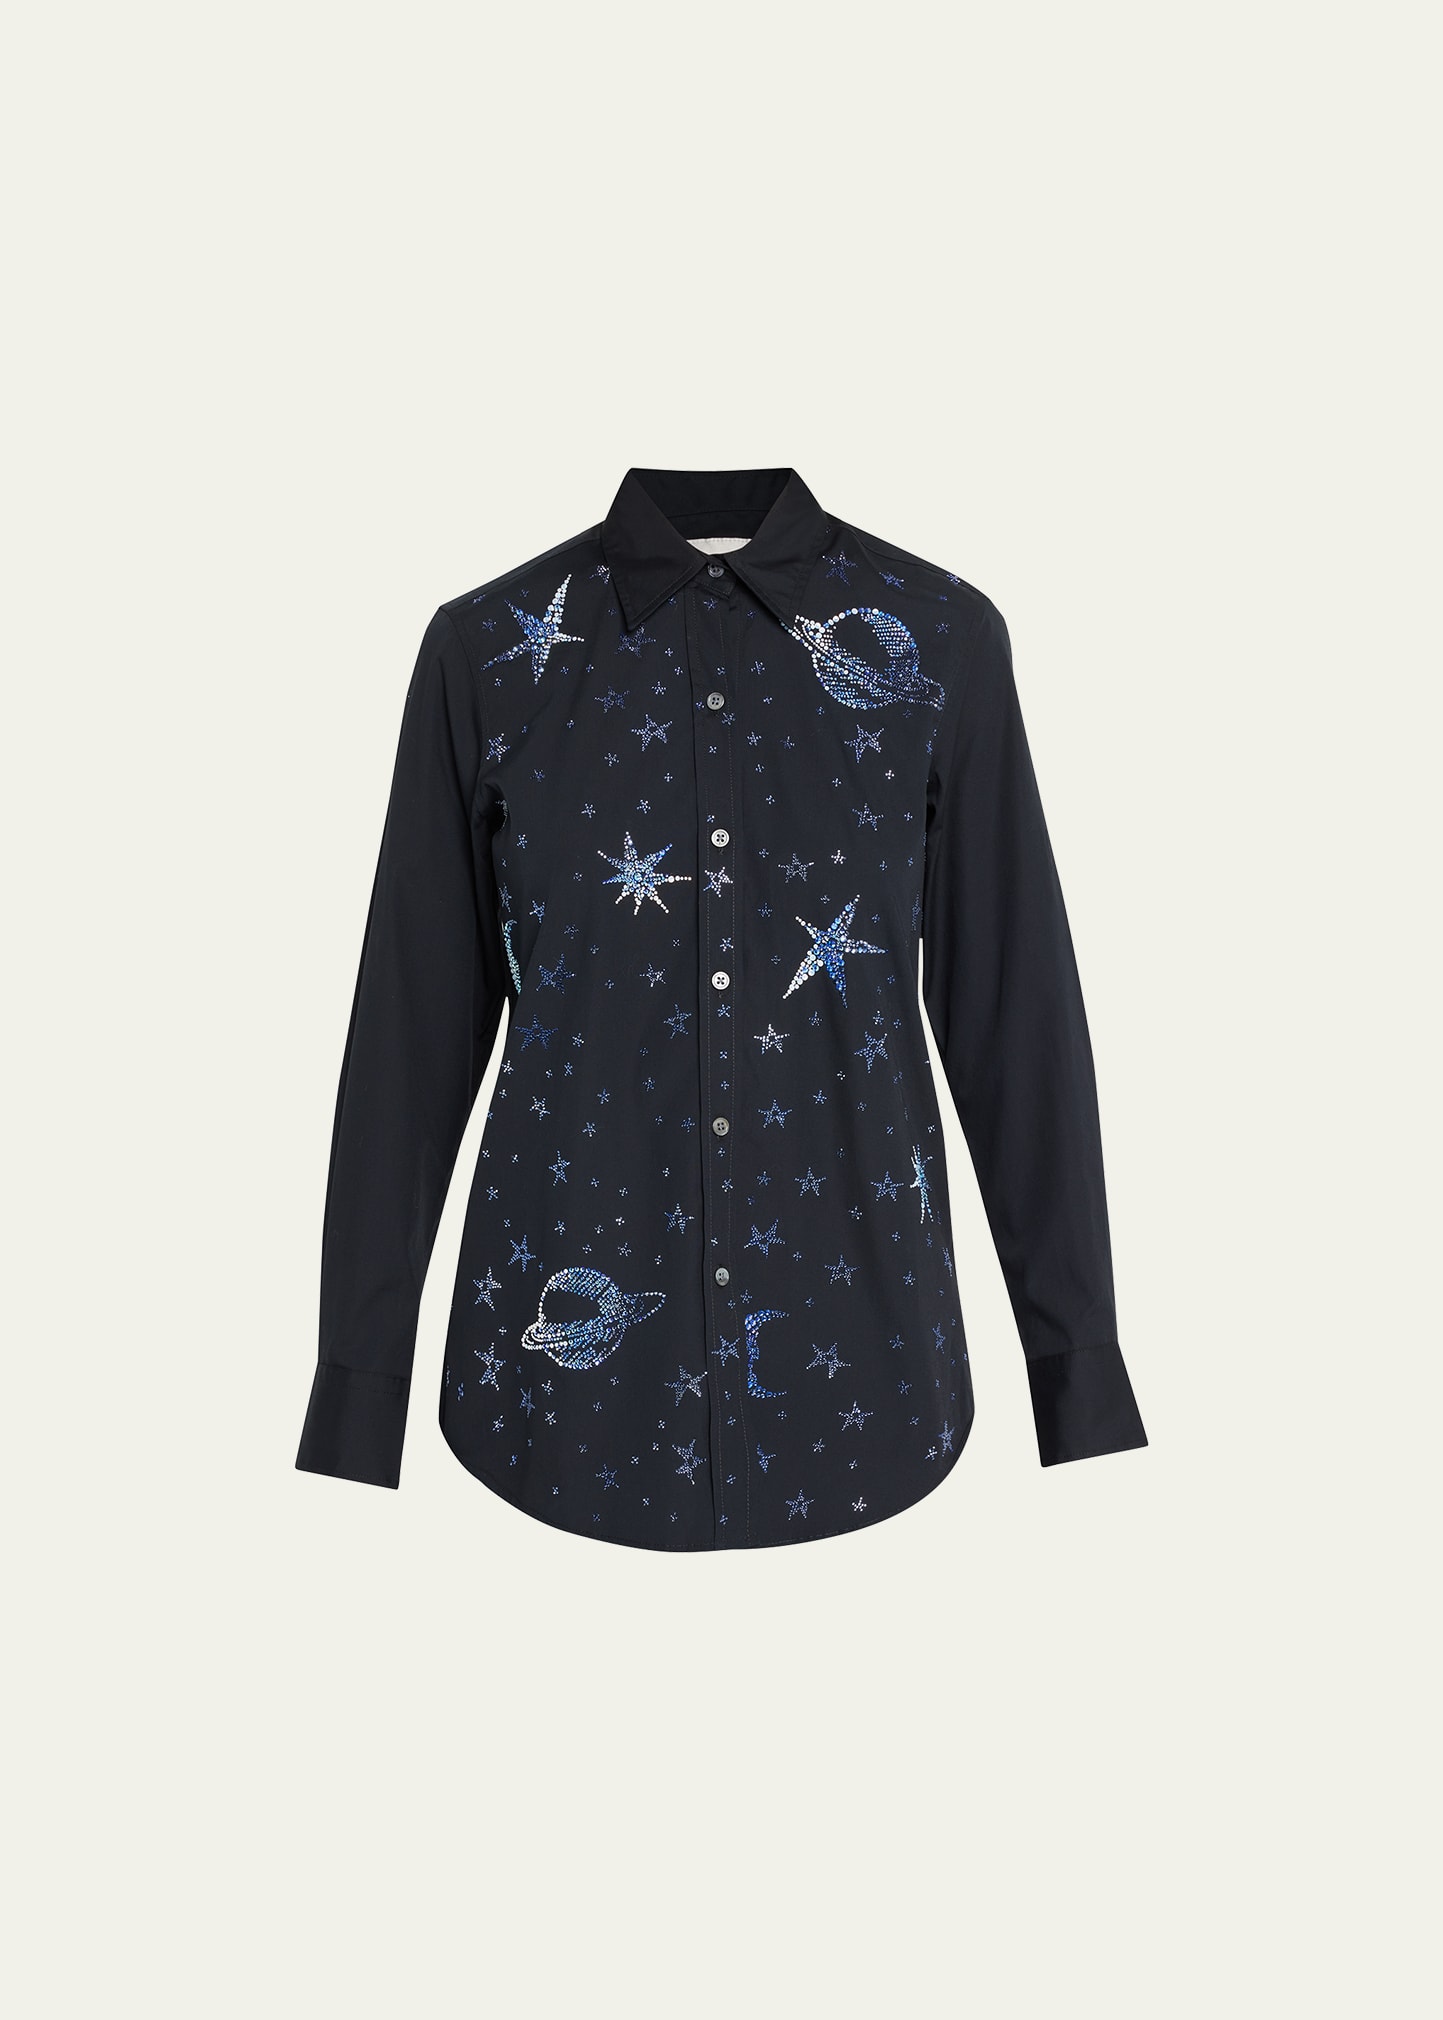 Libertine Here, There, And Everywhere Crystal New Classic Shirt In Black